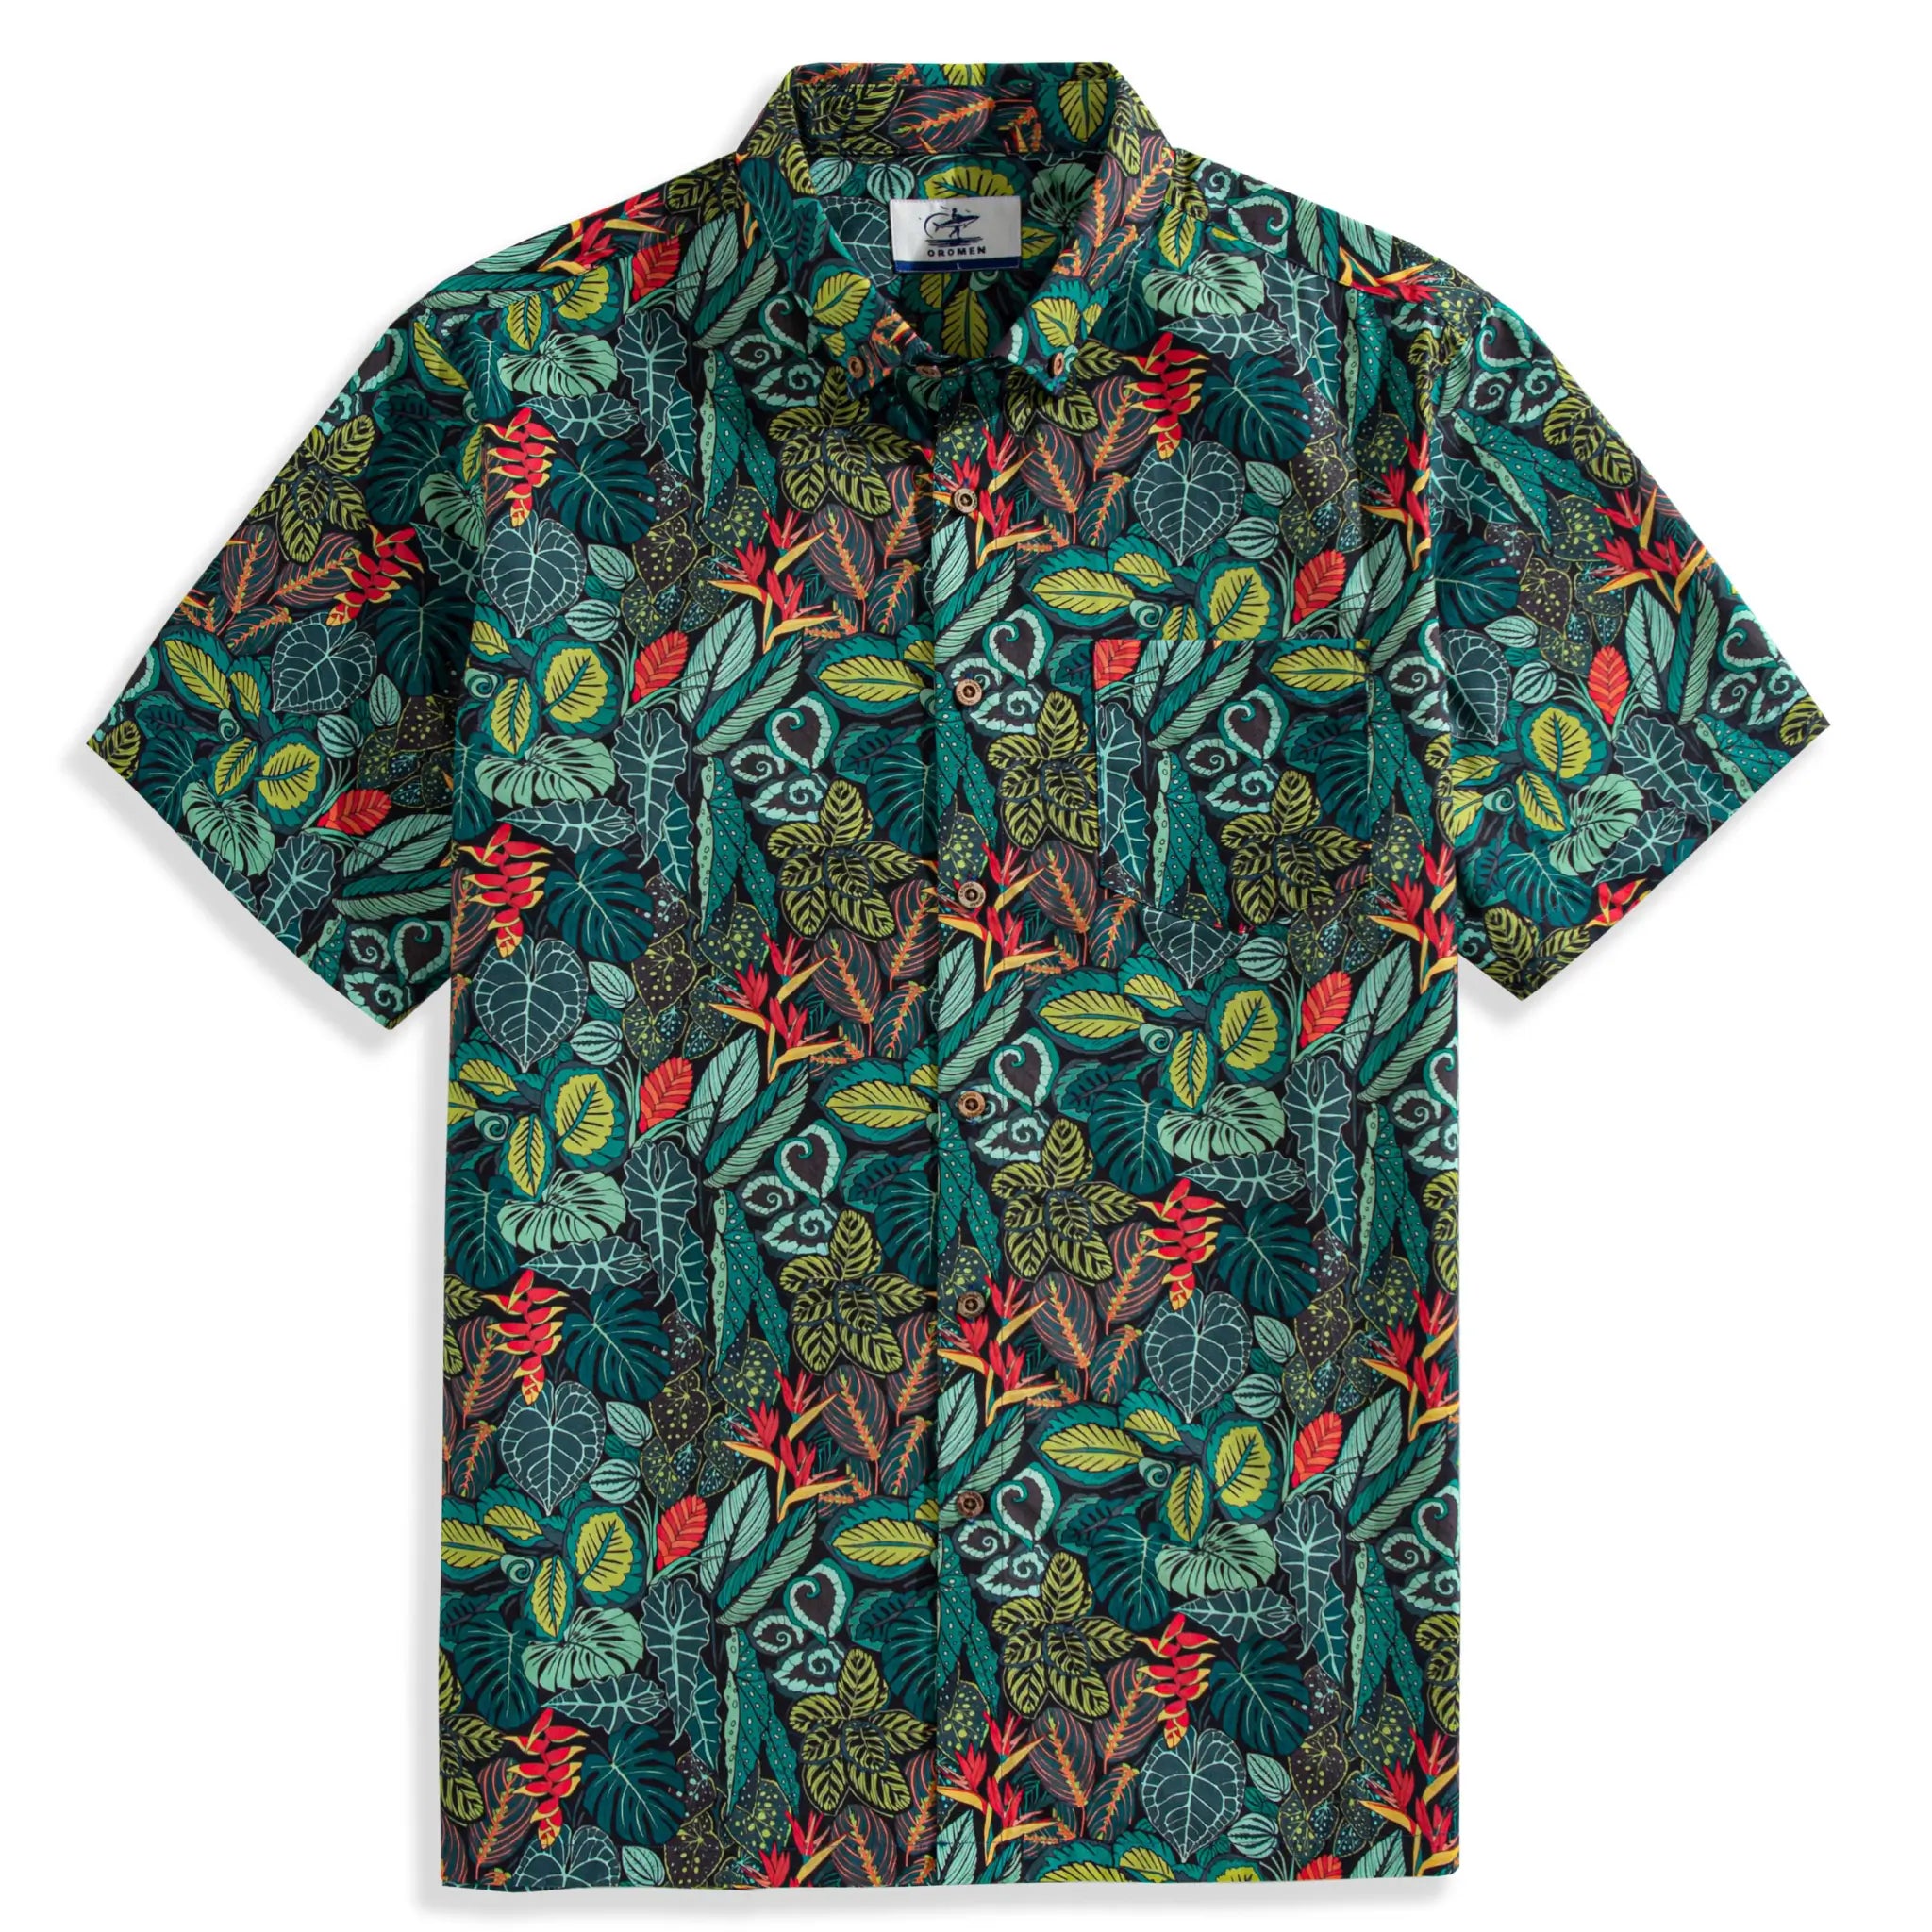 WIZARD OF OZ HAWAIIAN SHIRT FRONT PICTURE